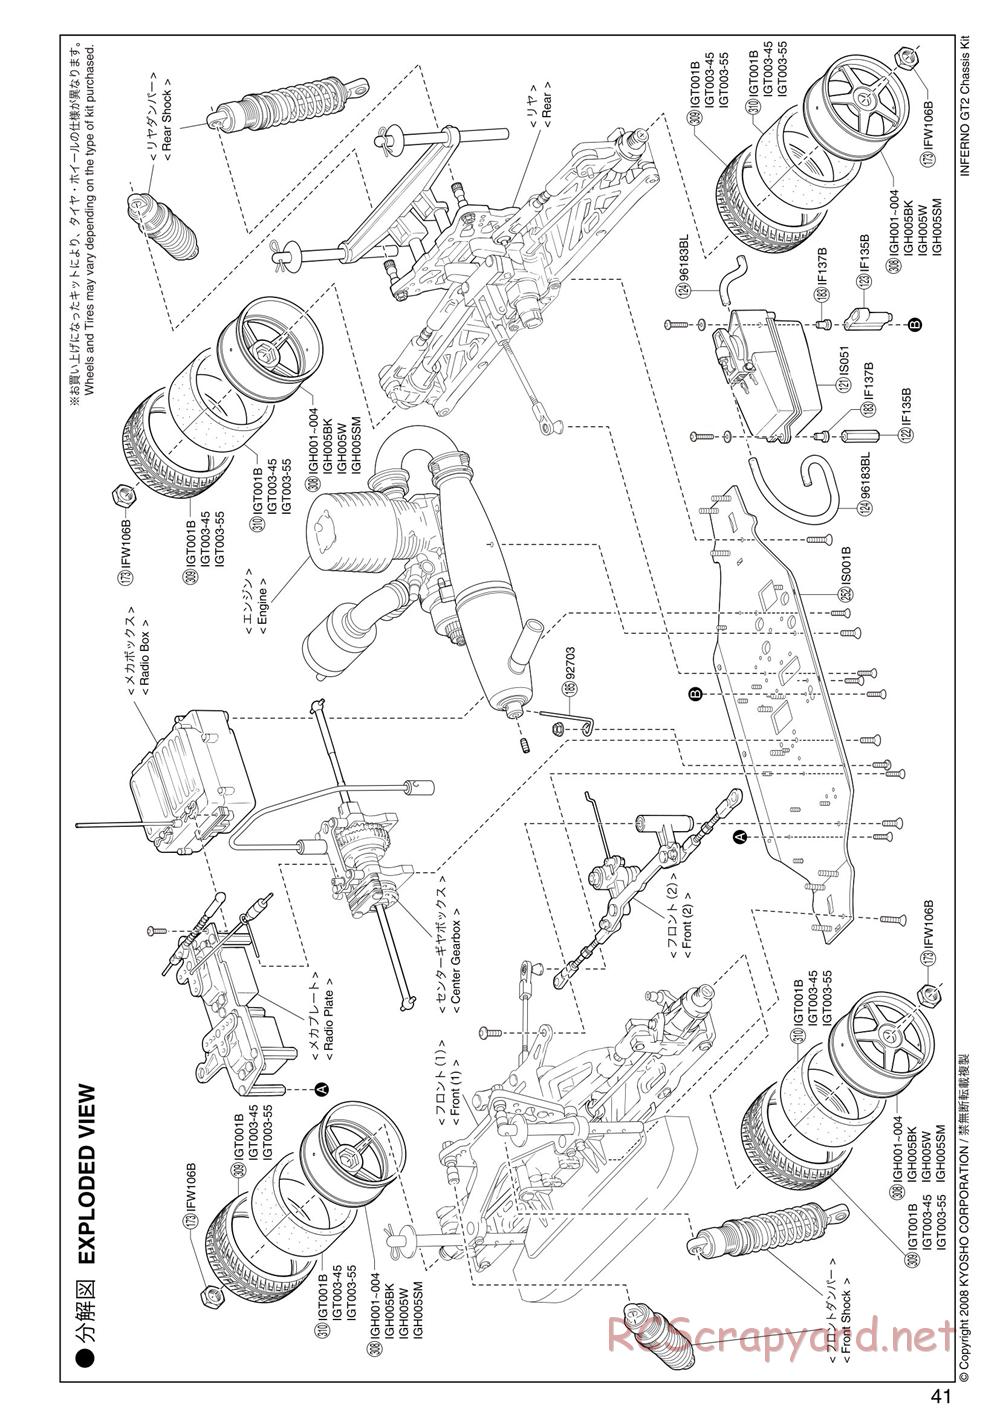 Kyosho - Inferno GT2 - Exploded Views - Page 1